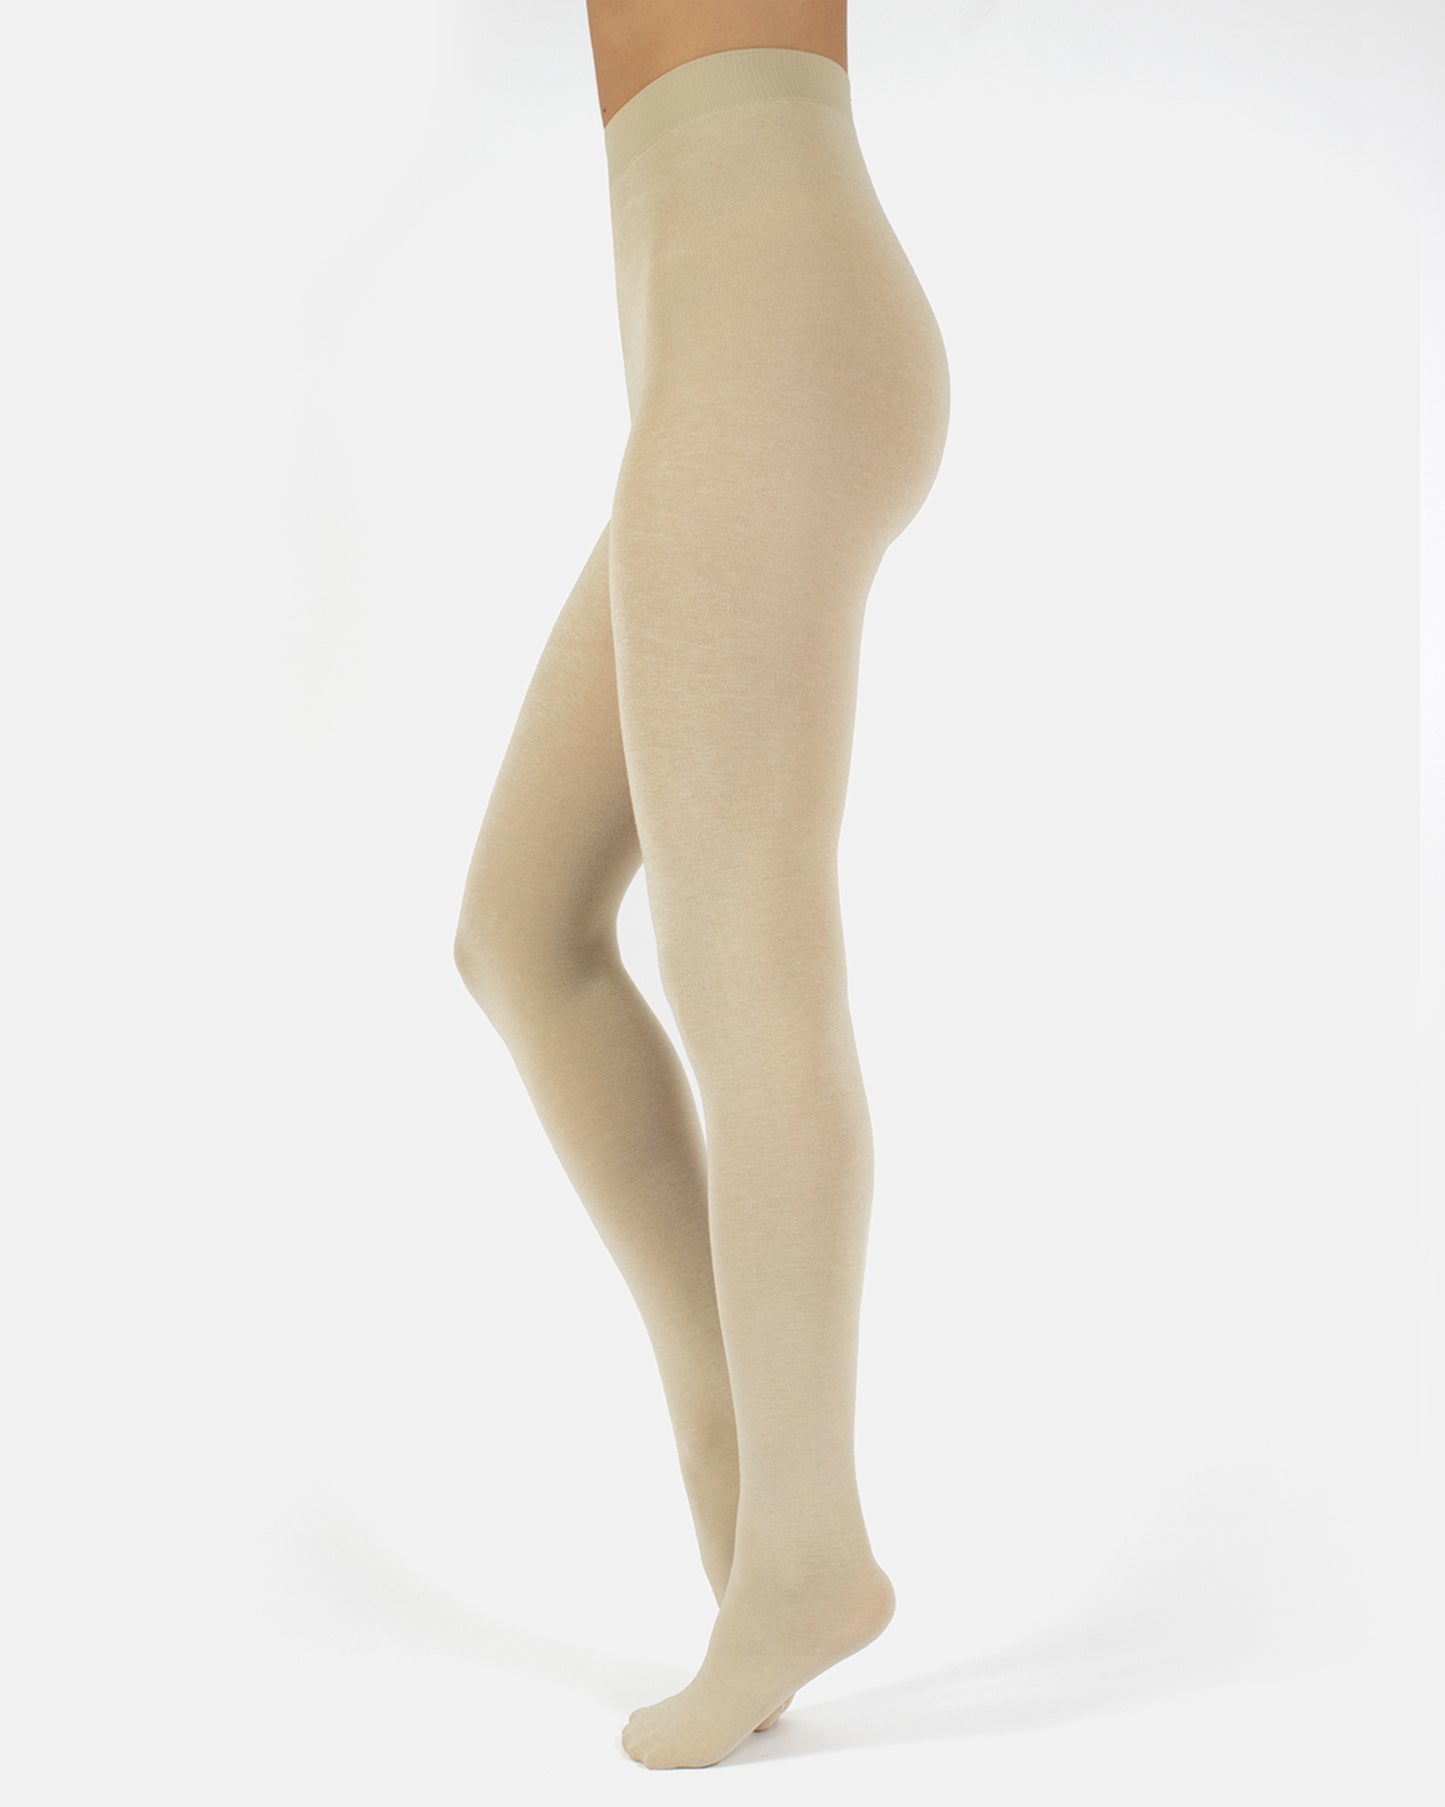 Calzitaly Cashmere Wool Tights - Ivory cream warm and light knitted viscose mix thermal tights with a touch of soft cashmere wool.